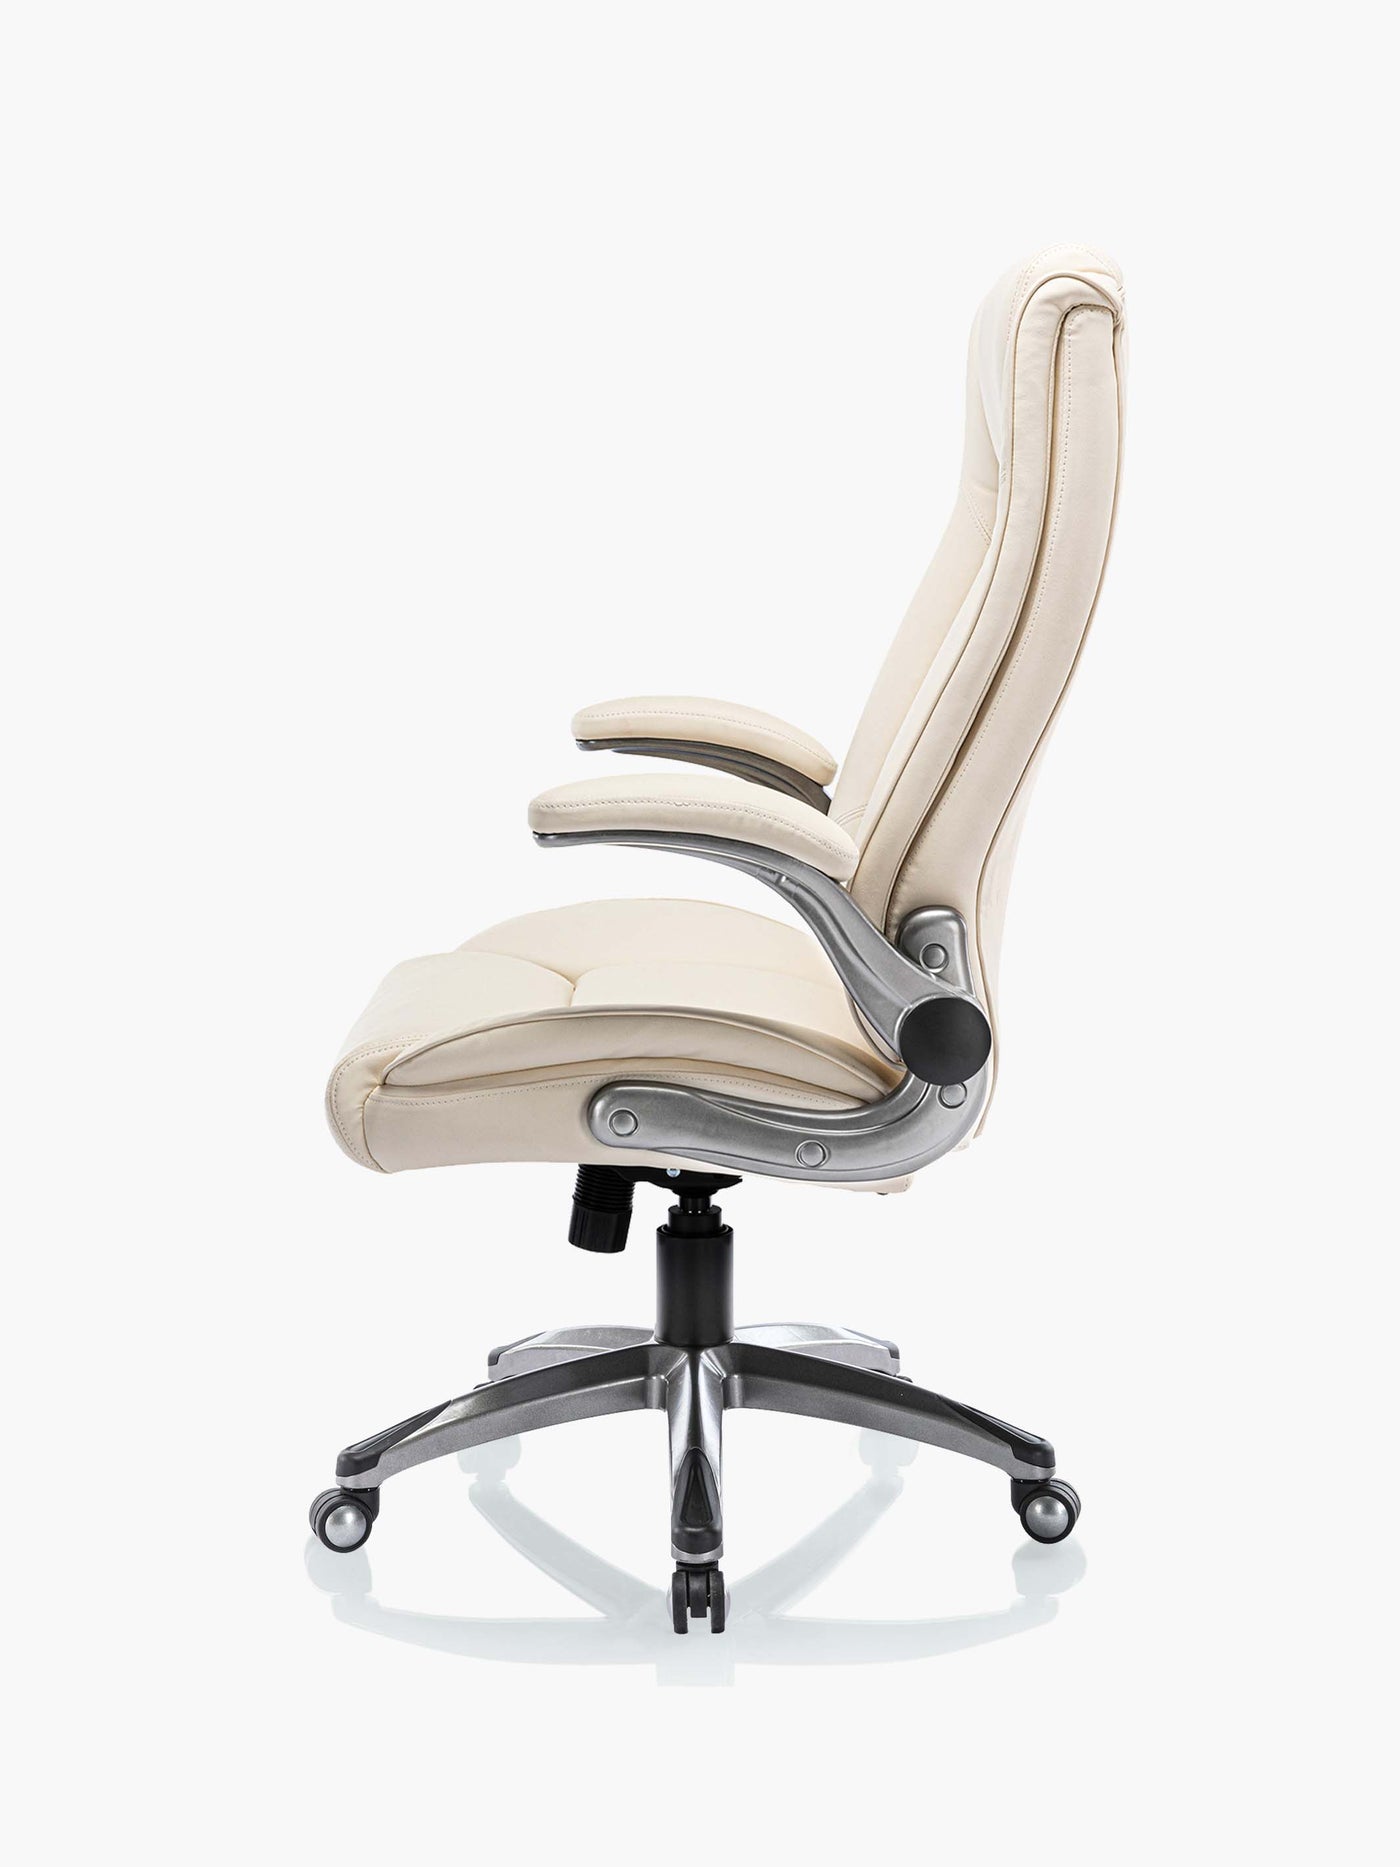 COLAMY Ergonomic High Back Leather Office Chair with Flip Up Armrests DM2199 Diamond Pattern #color_beige